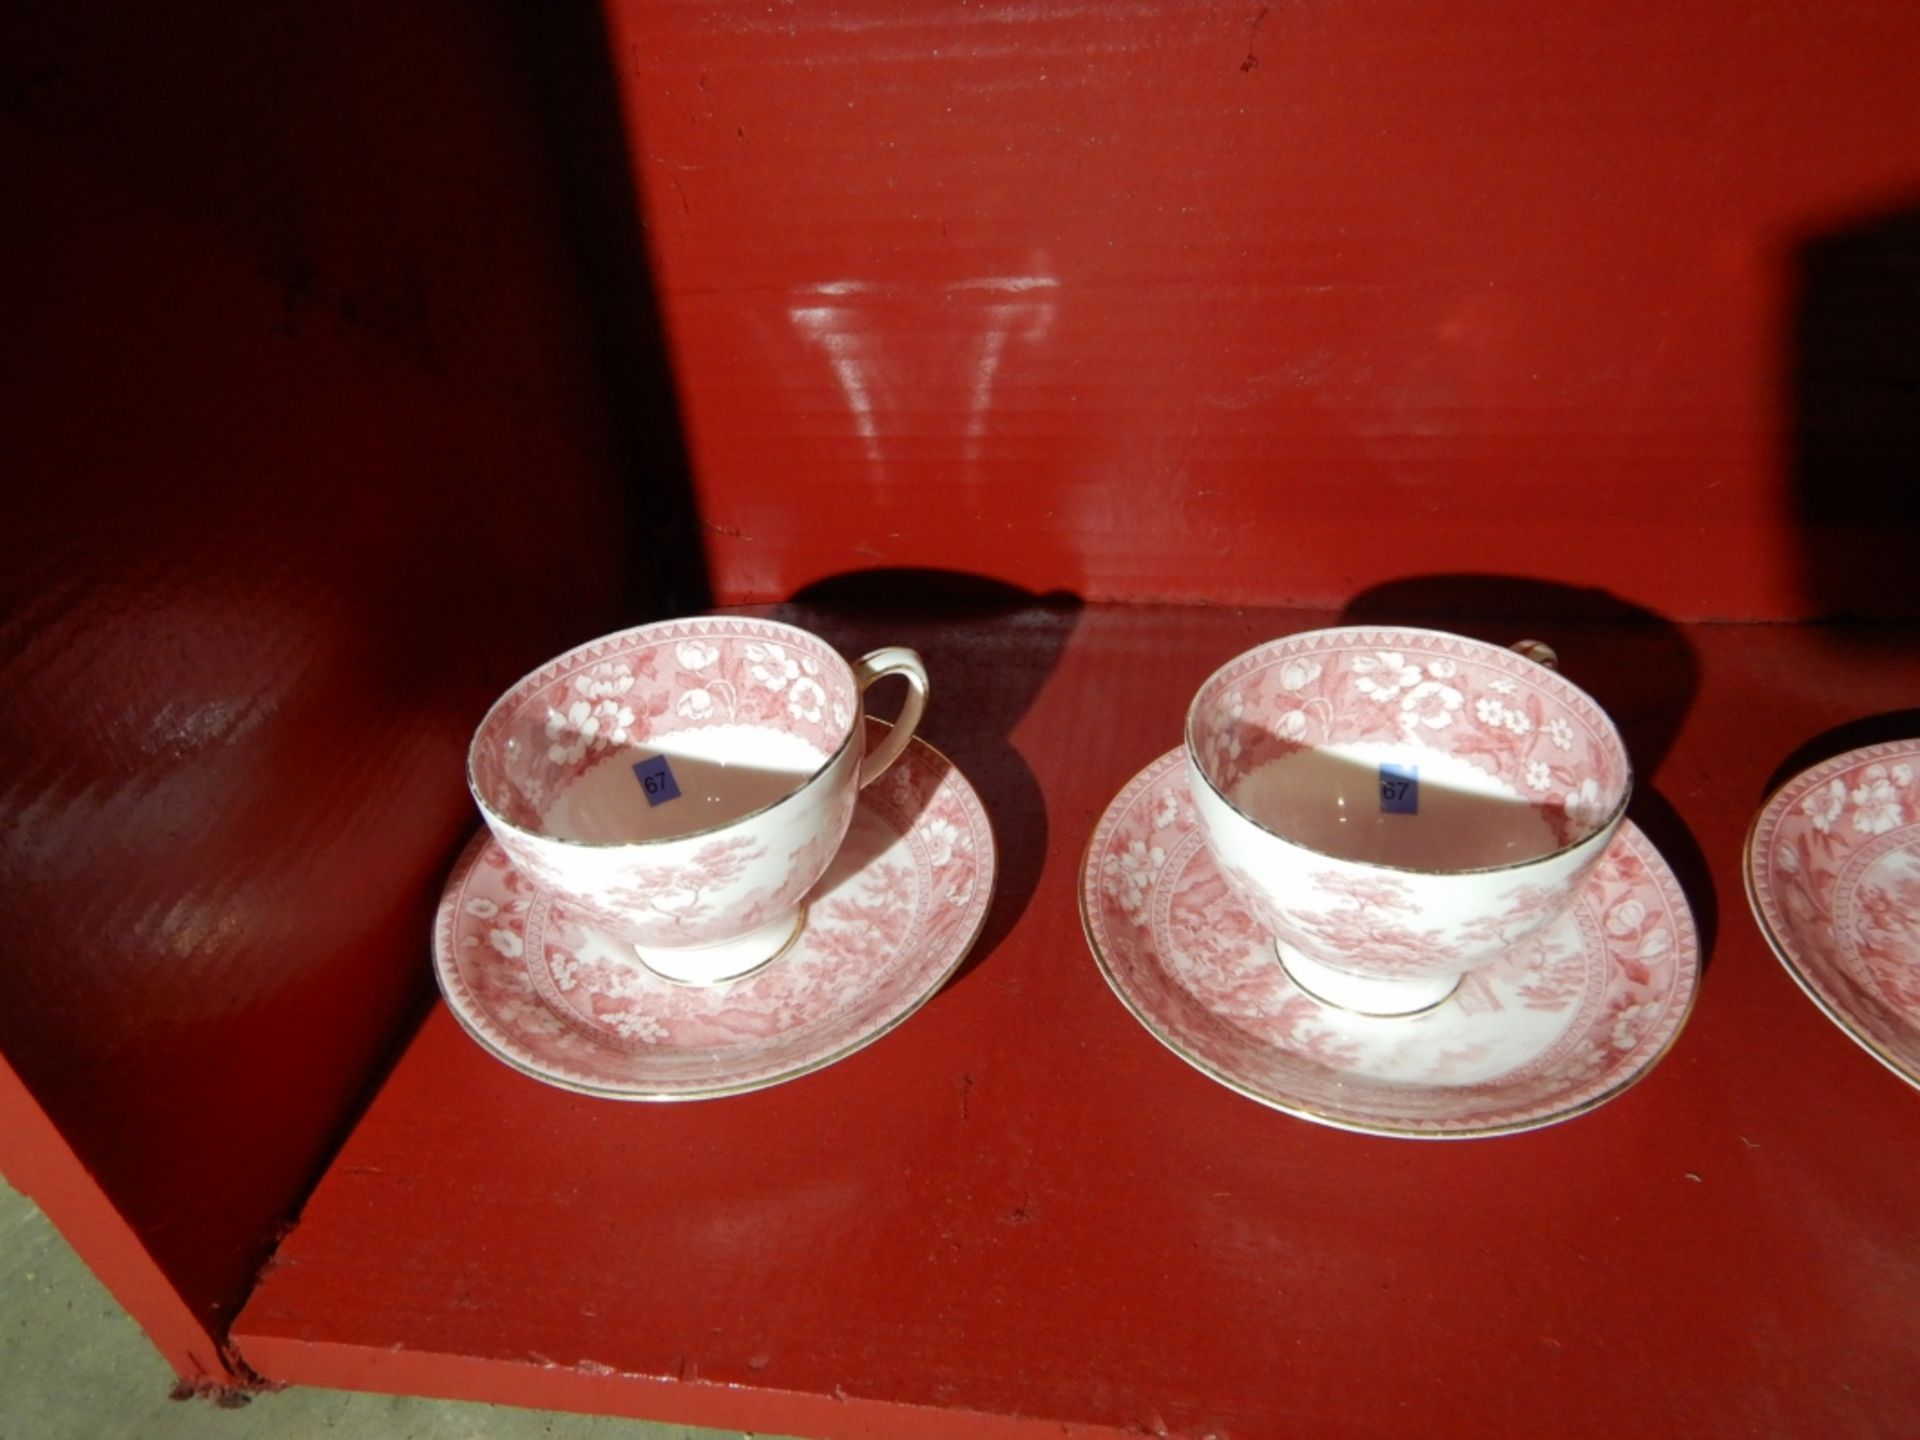 ANTIQUE "RADFORD TOWER" CHINA - COMPLETE DISH & CUP SET - Image 17 of 23